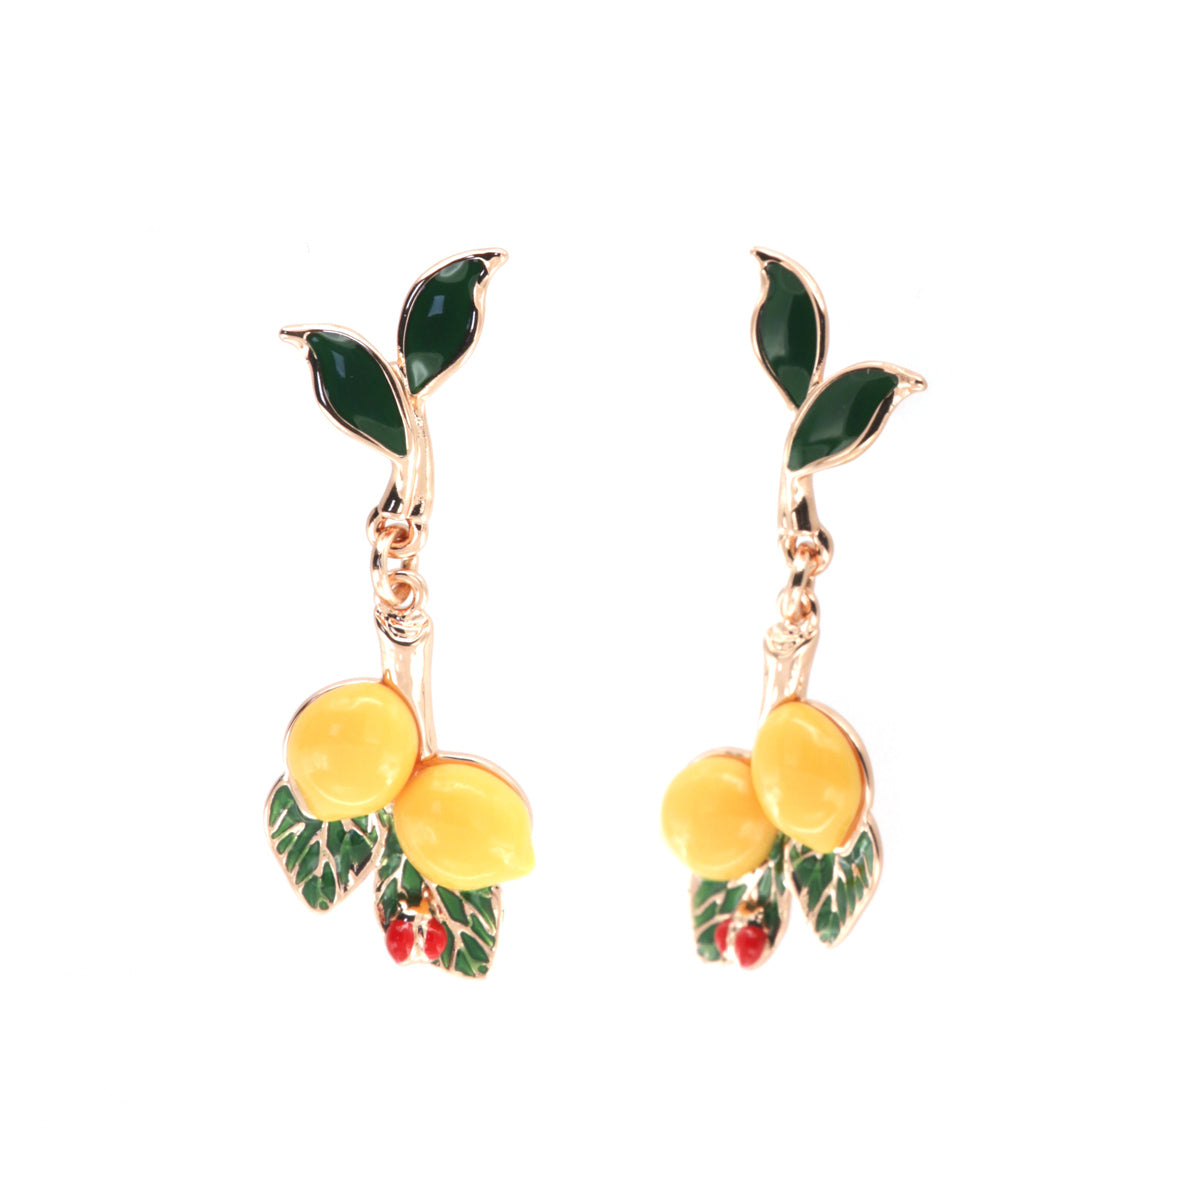 Metal earrings with pendant Sicily lemons, embellished with colored glazes